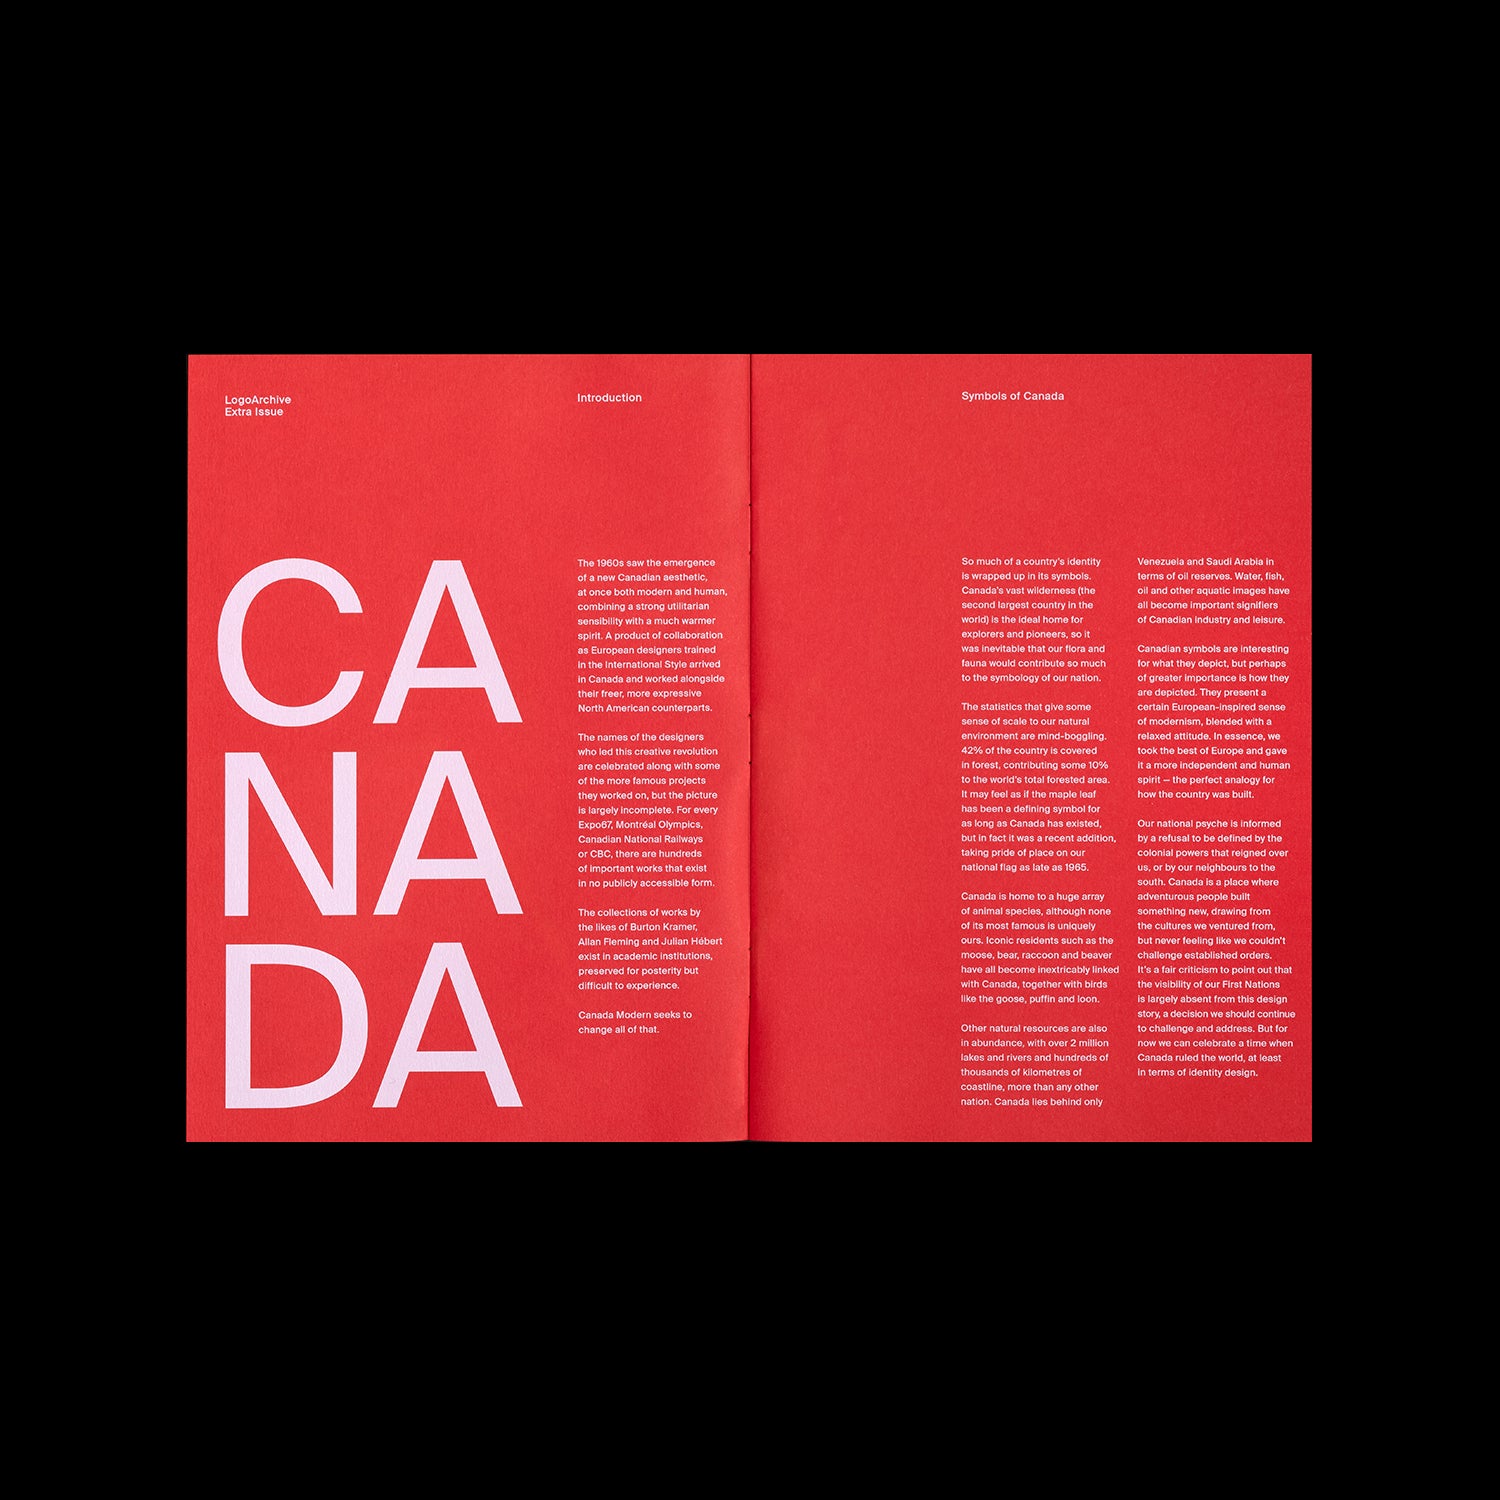 LogoArchive Extra Issue 1: Canada Modern